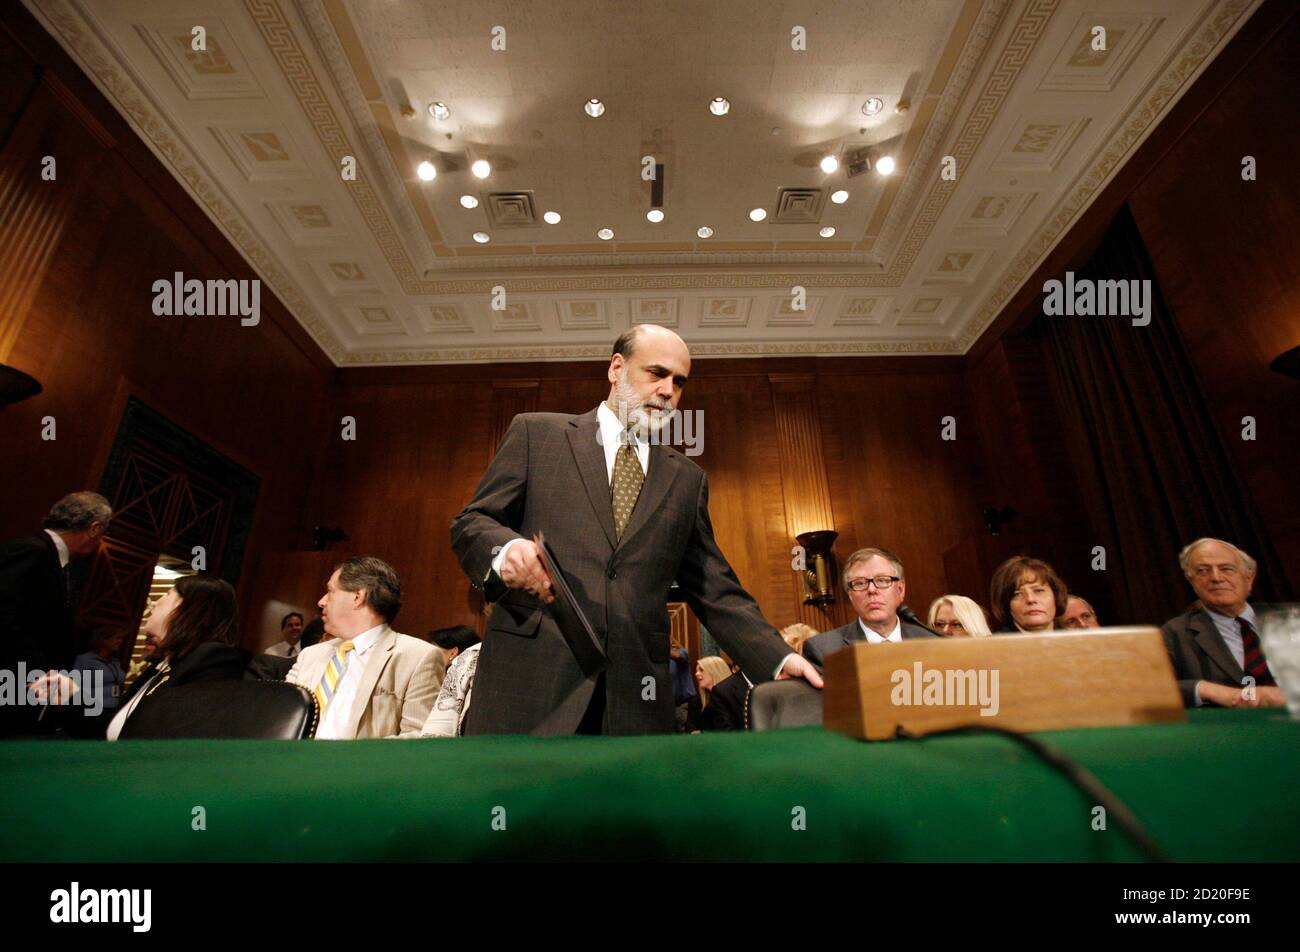 U.S. Federal Reserve Chairman Ben Bernanke arrives at a Senate Banking, Housing and Urban Affairs committee hearing on Capitol Hill, July 19, 2007. Bernanke said on Thursday he remains optimistic top U.S. banking regulators will reach a consensus on an international capital adequacy plan under the Basel II framework.         REUTERS/Jason Reed      (UNITED STATES) Stock Photo